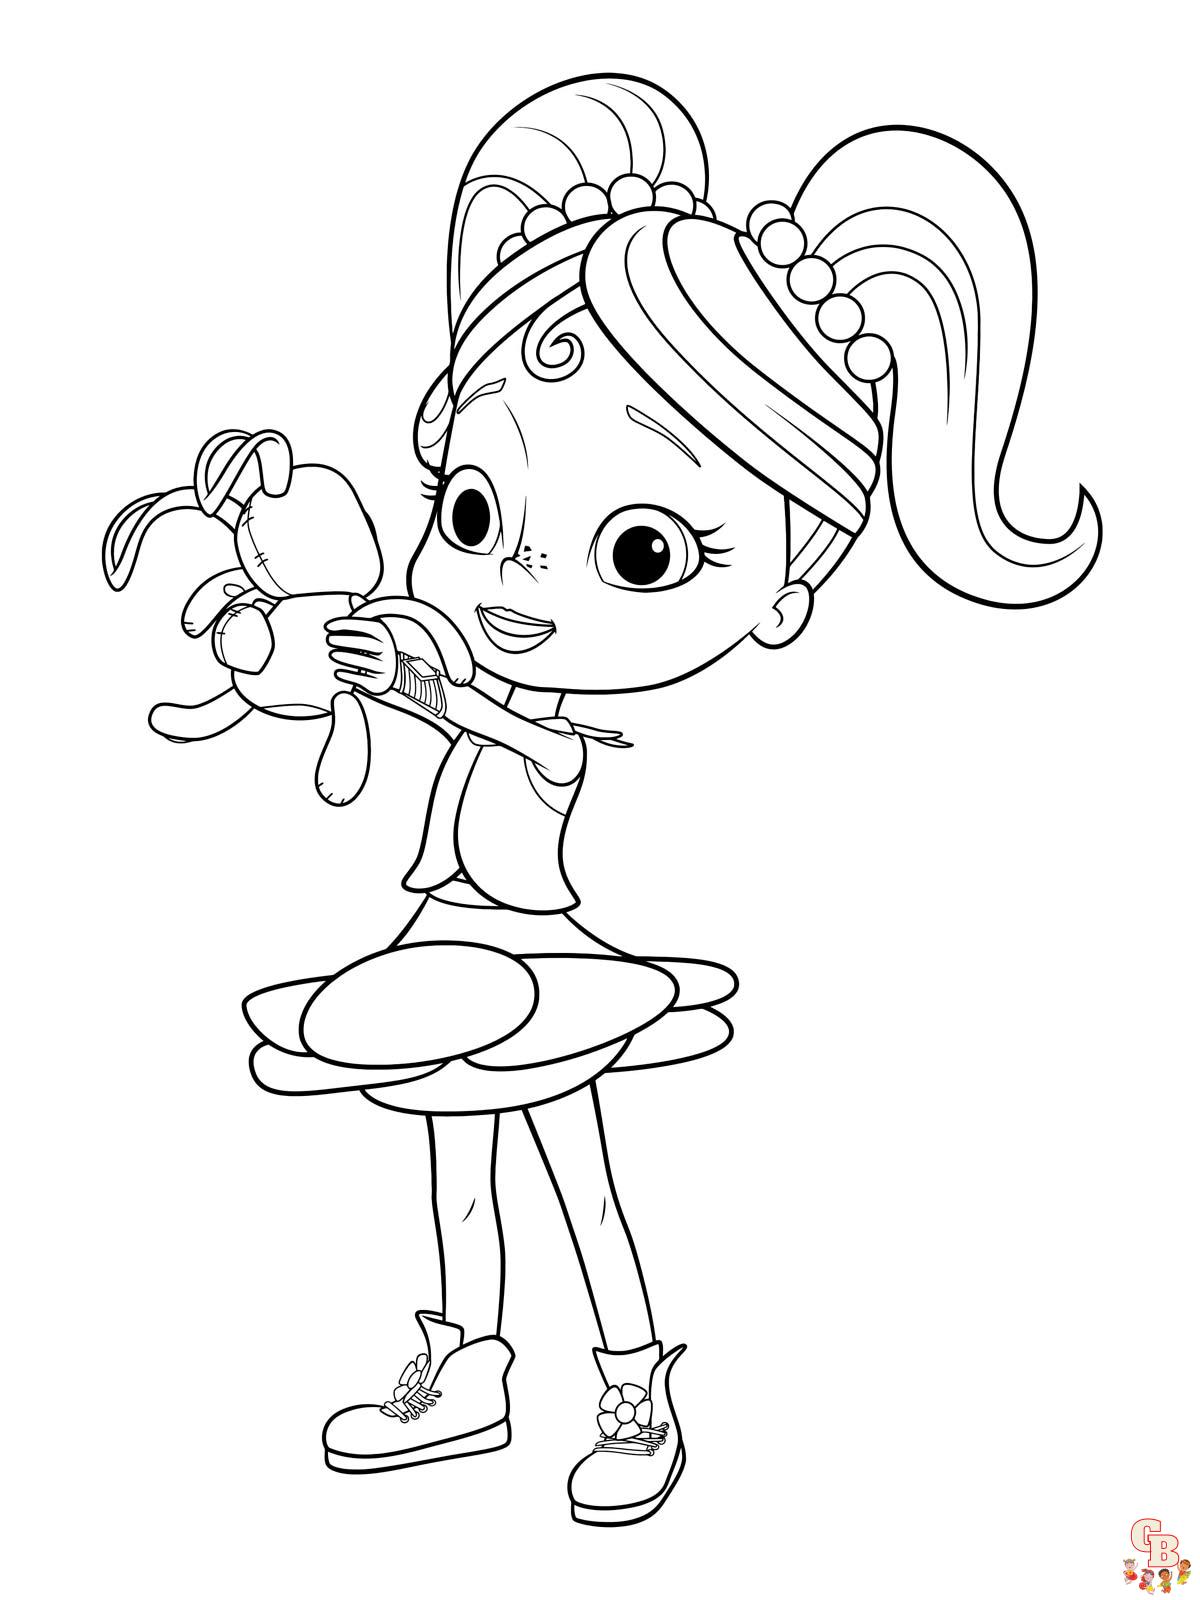 Rainbow Rangers Coloring Pages 9